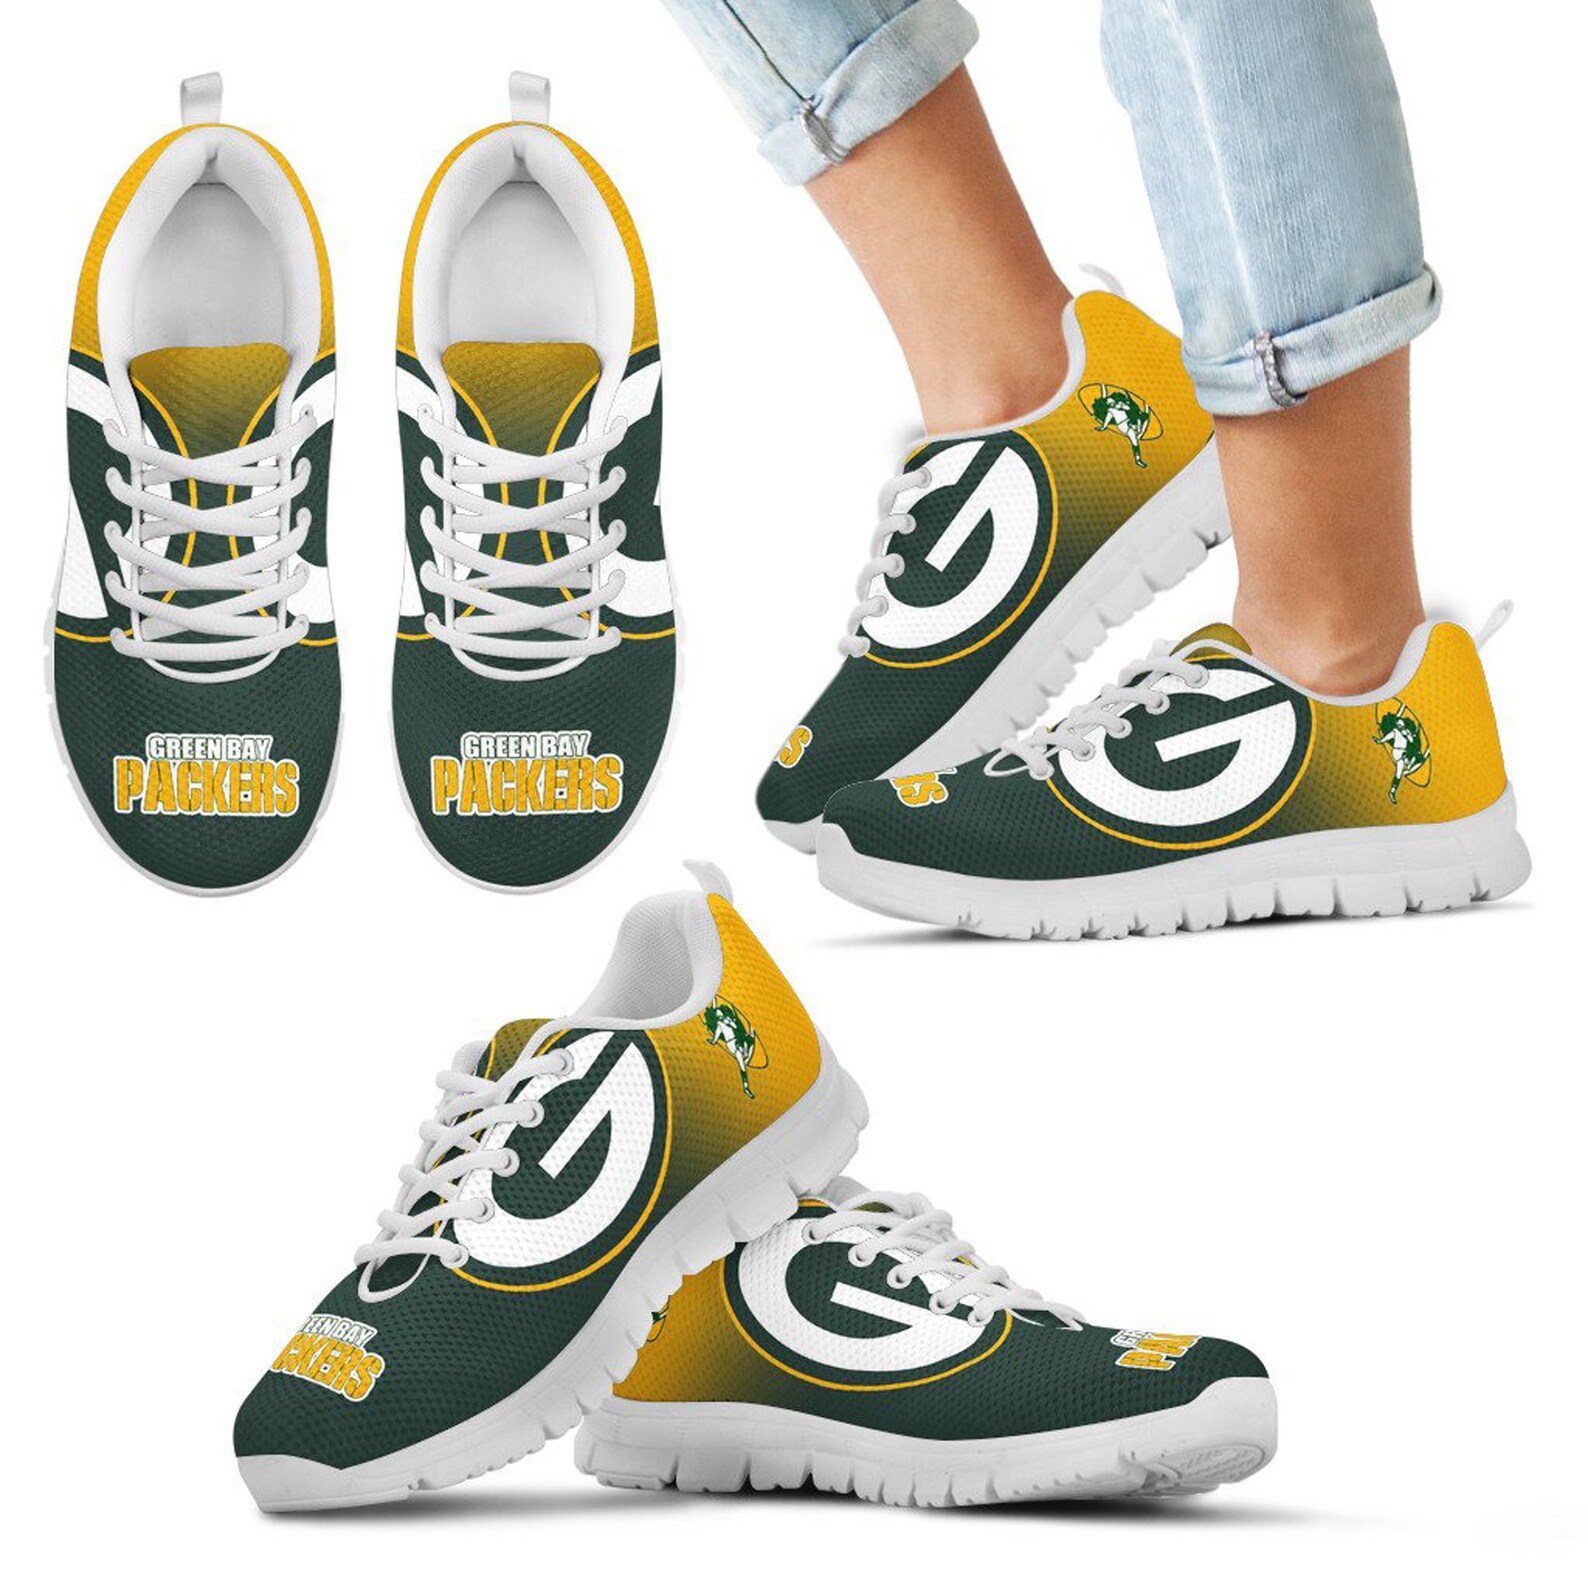 Green Bay Packers Shoes Green Bay Packers Sneakers Shoes | Etsy